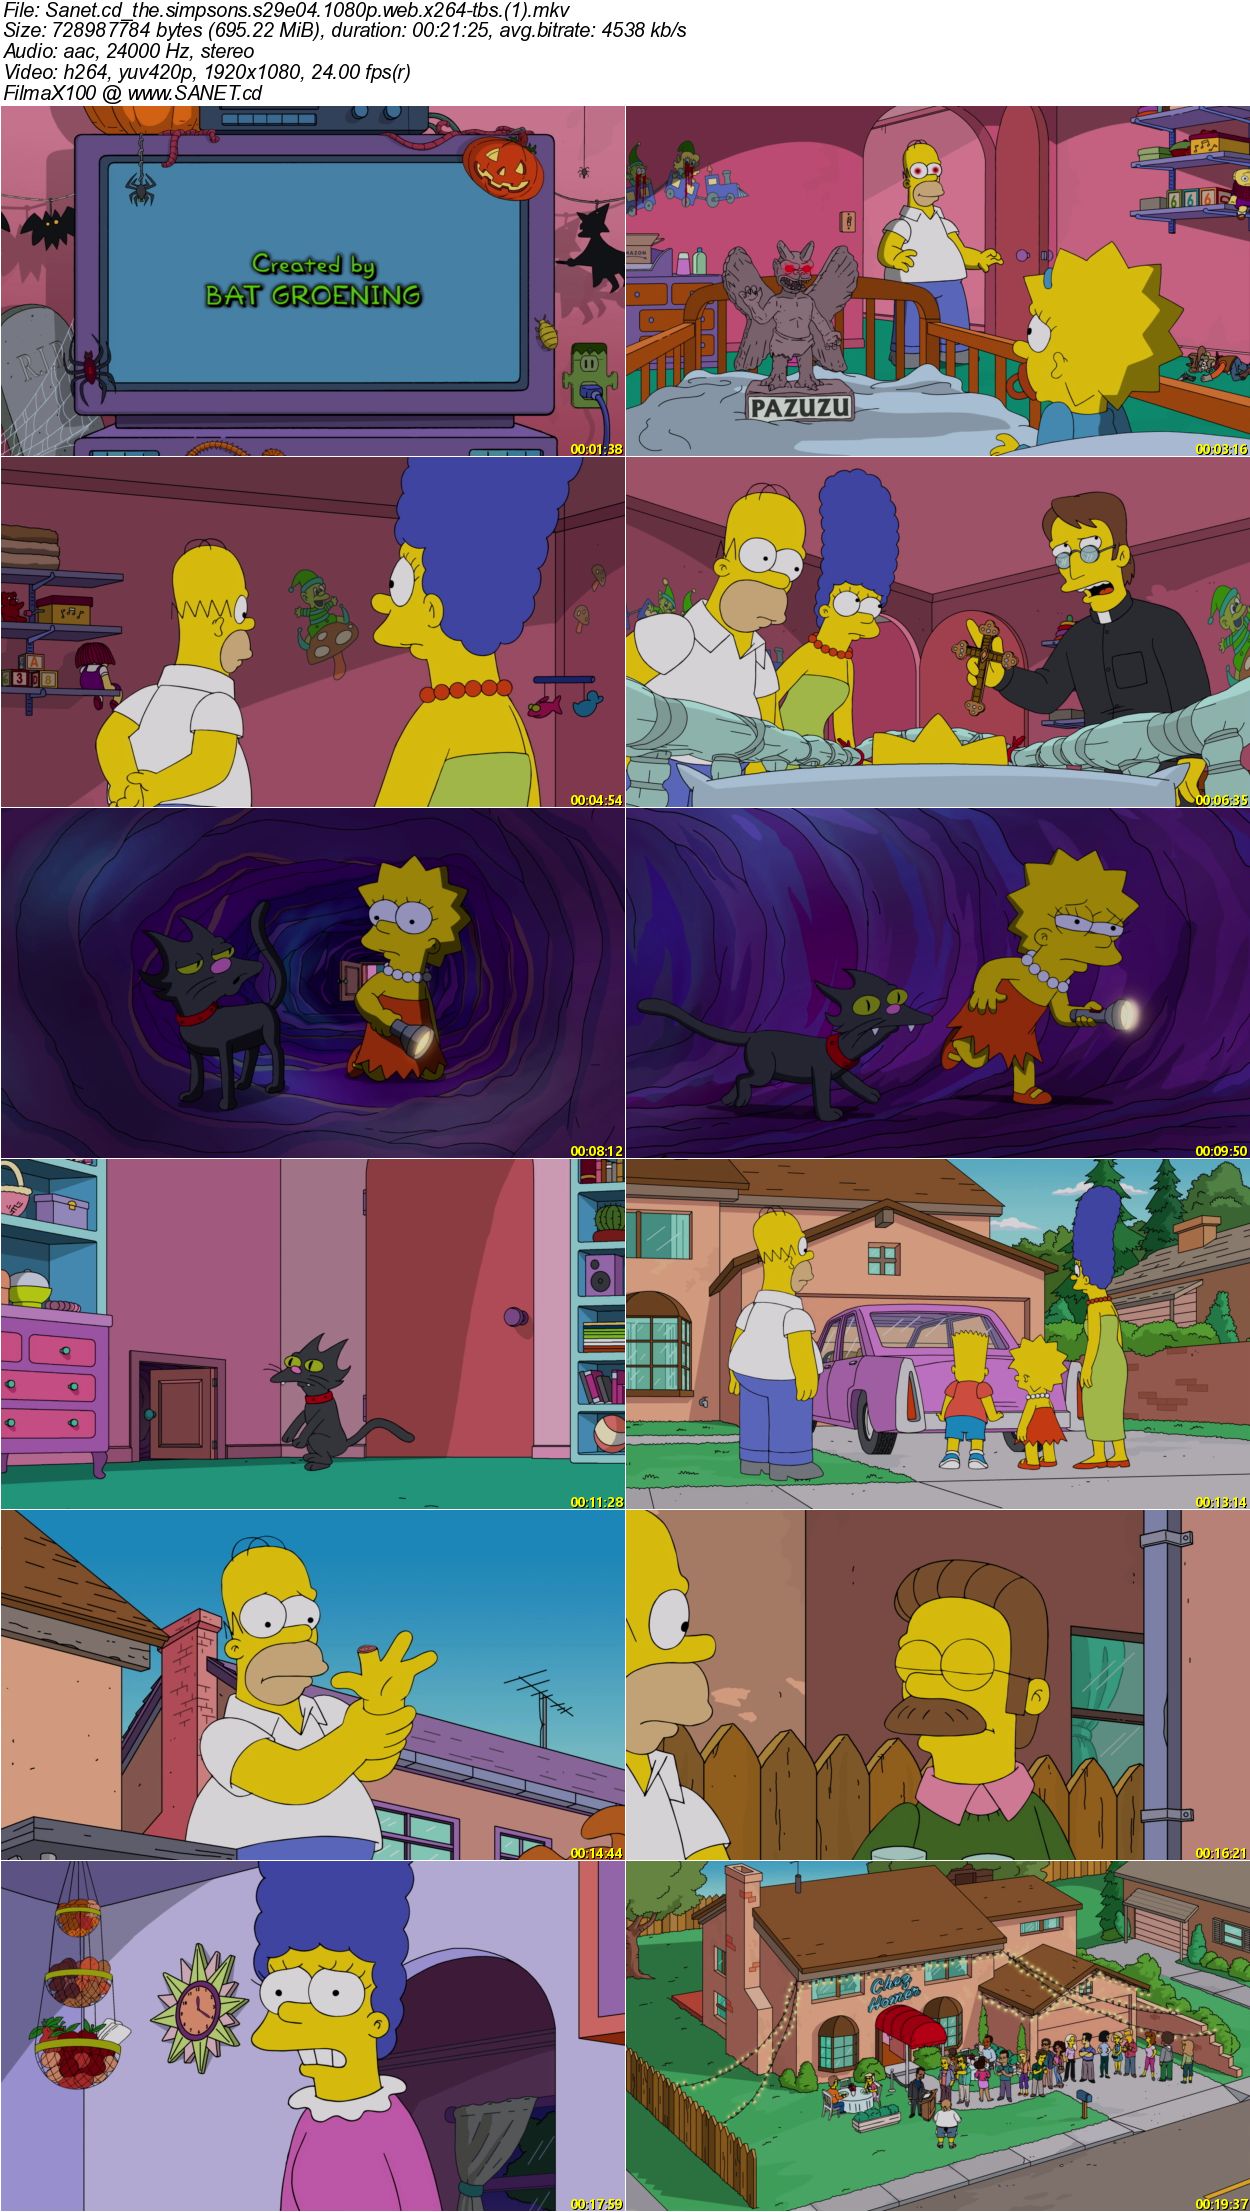 Download The Simpsons S29E04 1080p WEB x264-TBS - SoftArchive